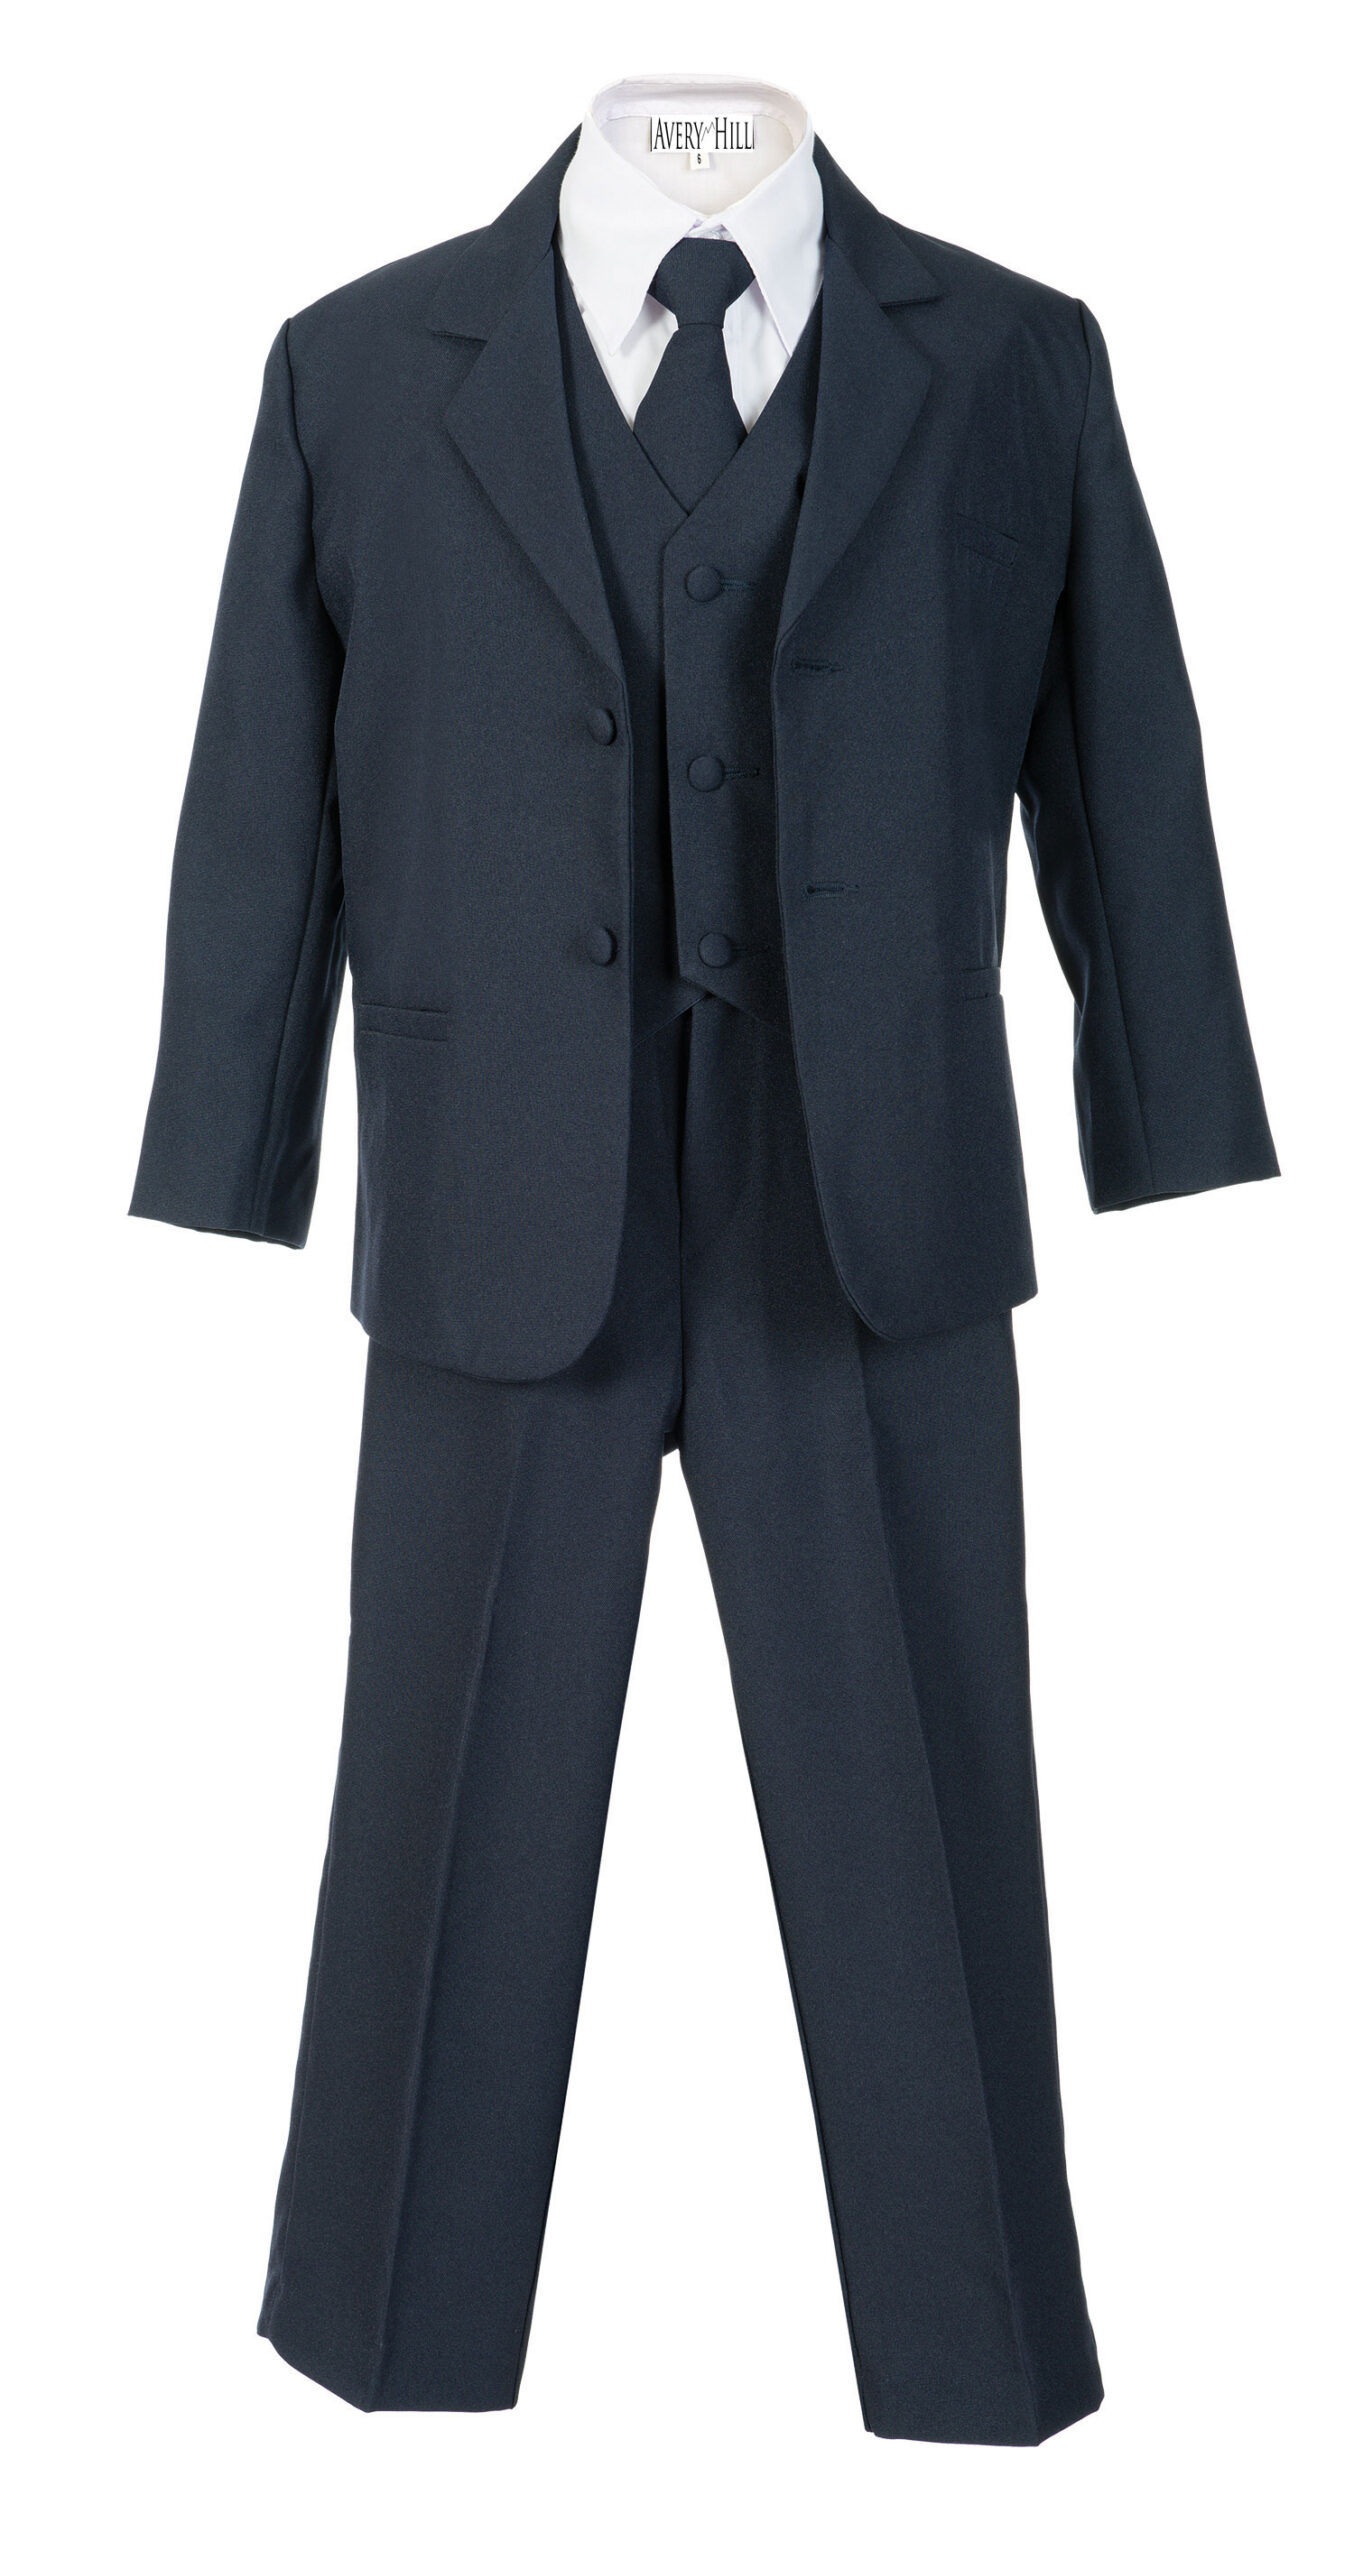 Avery Hill Boys Formal 5 Piece Suit with Shirt and Vest Navy - 12